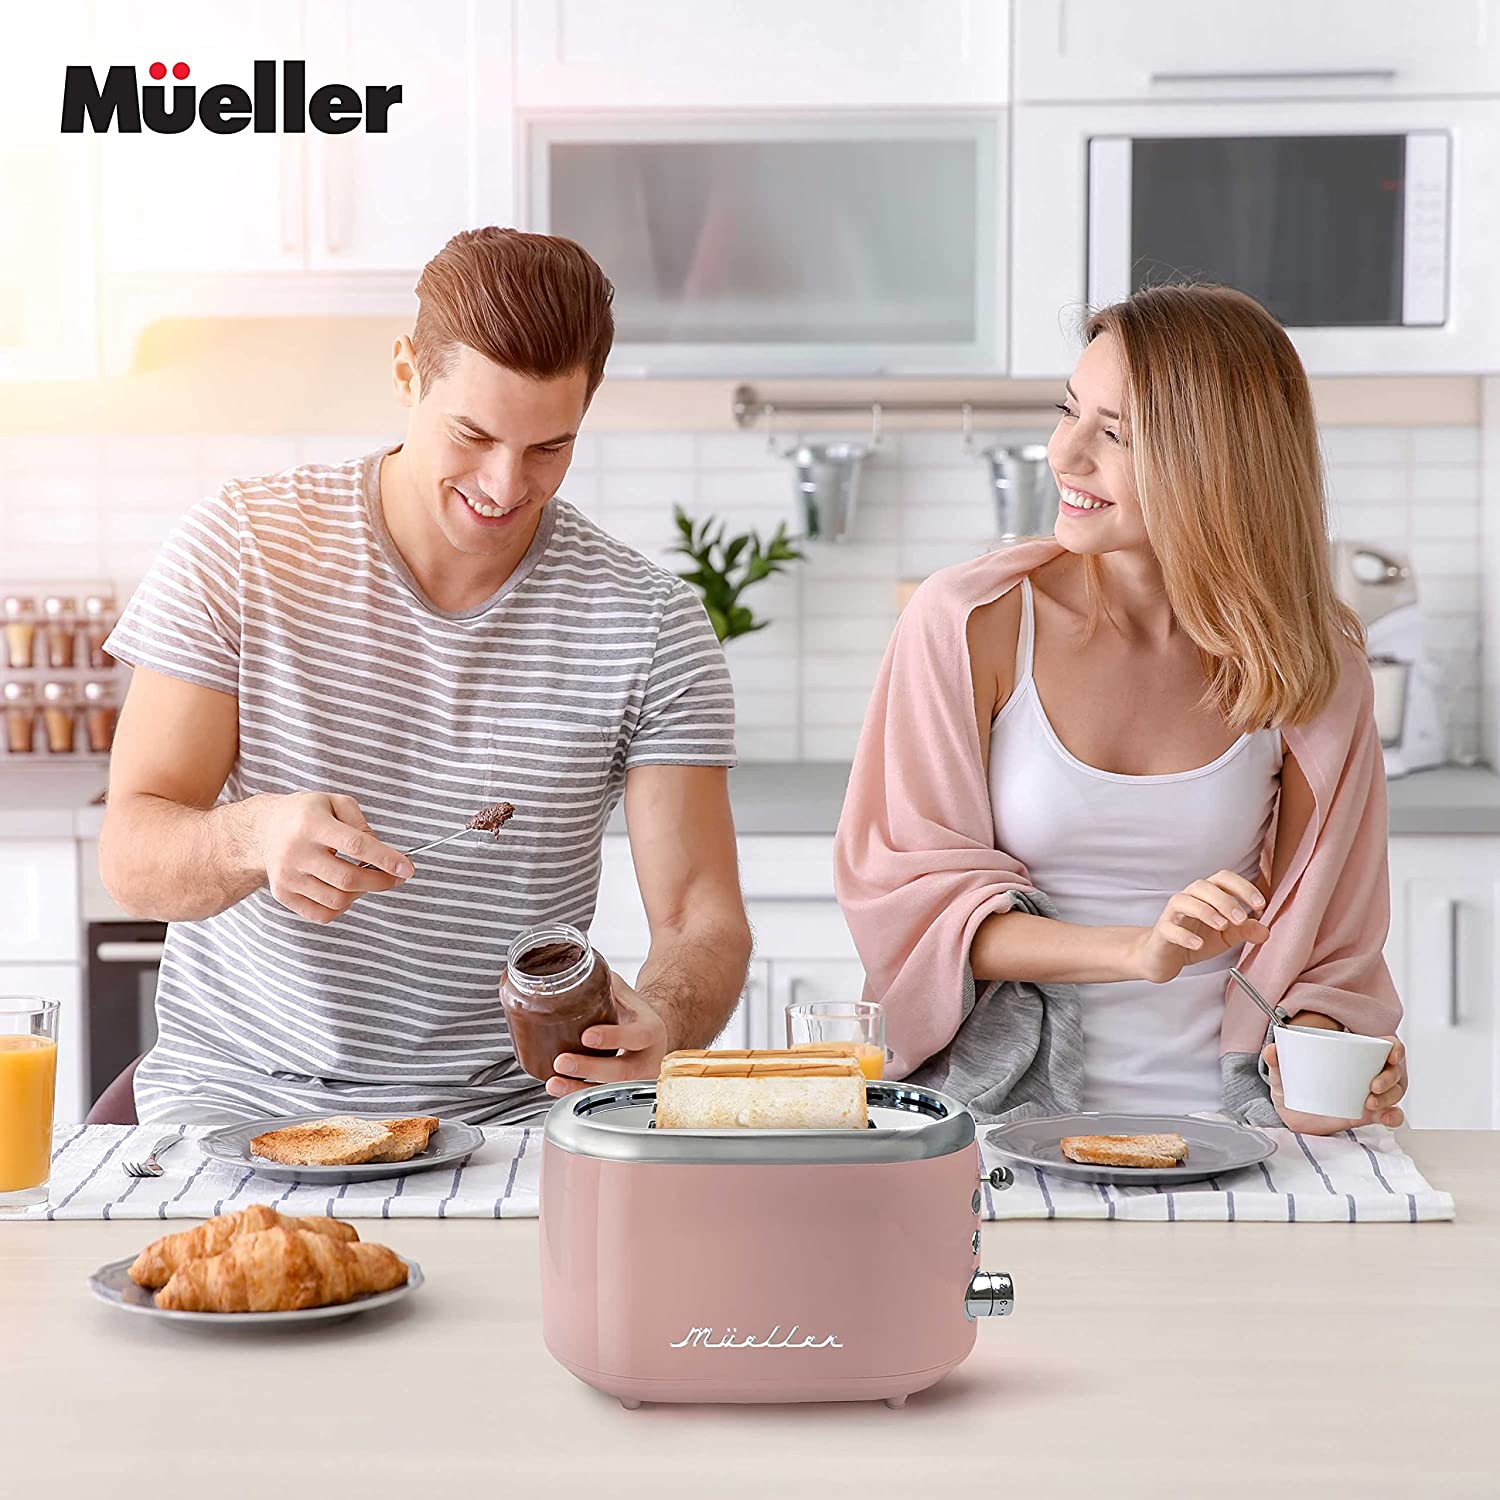  Mueller Retro Toaster 4 Slice with Extra Wide Slots Bagel,  Defrost, and Cancel Function, 6 Browning Levels, Dual Independent Controls,  Removable Crumb Tray and High Lift Levers, Pink: Home & Kitchen